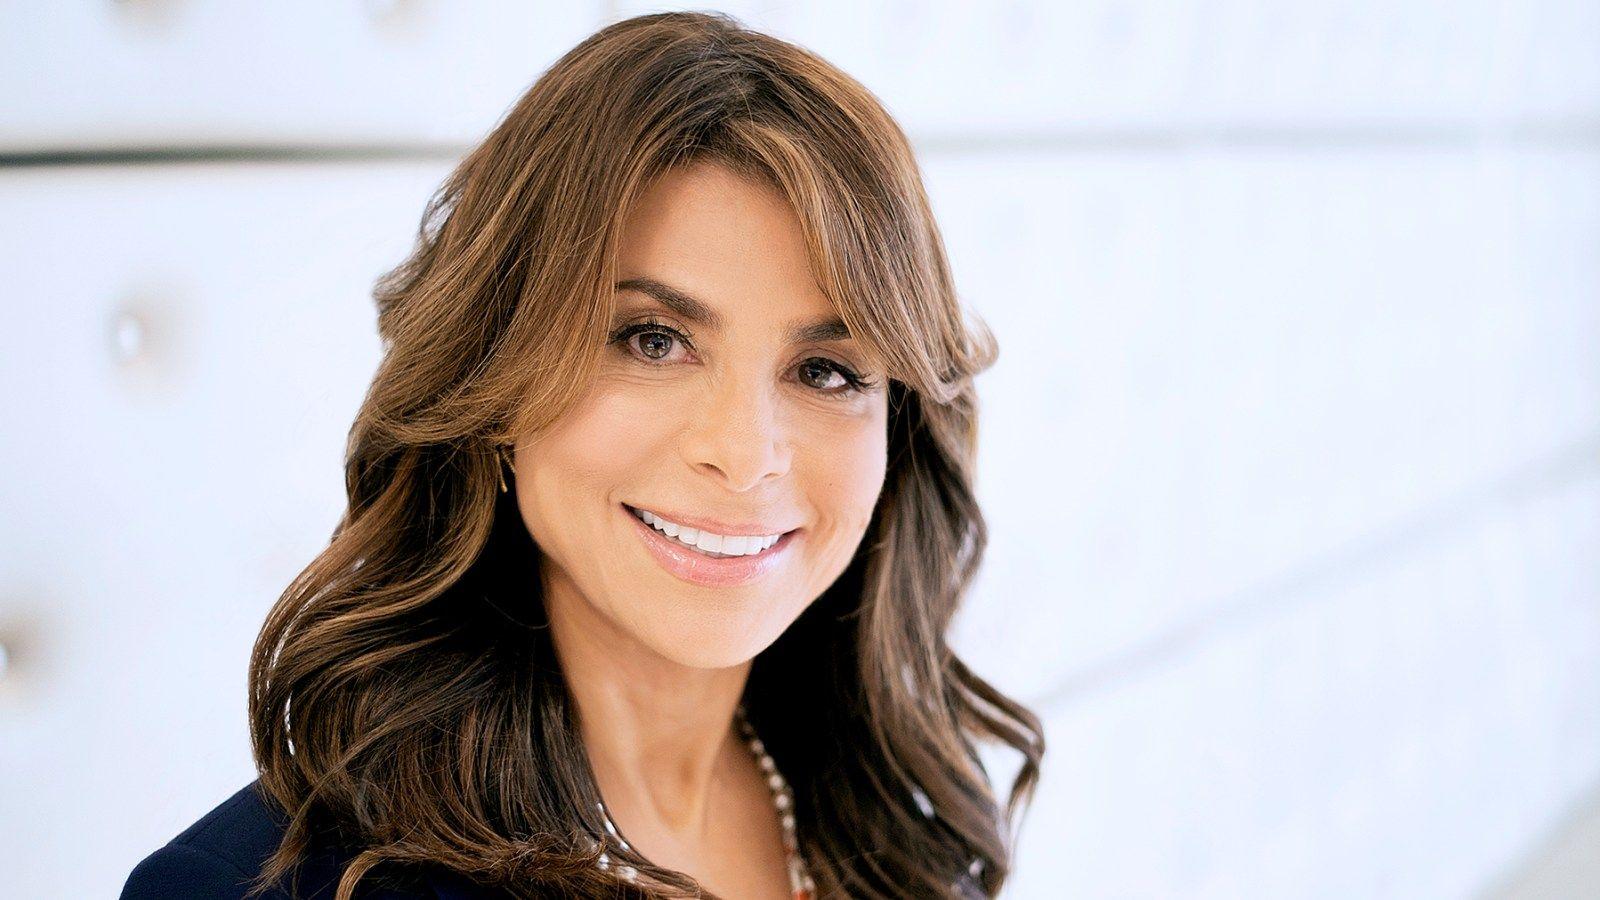 Paula Abdul: 25 Things You Don't Know About Me